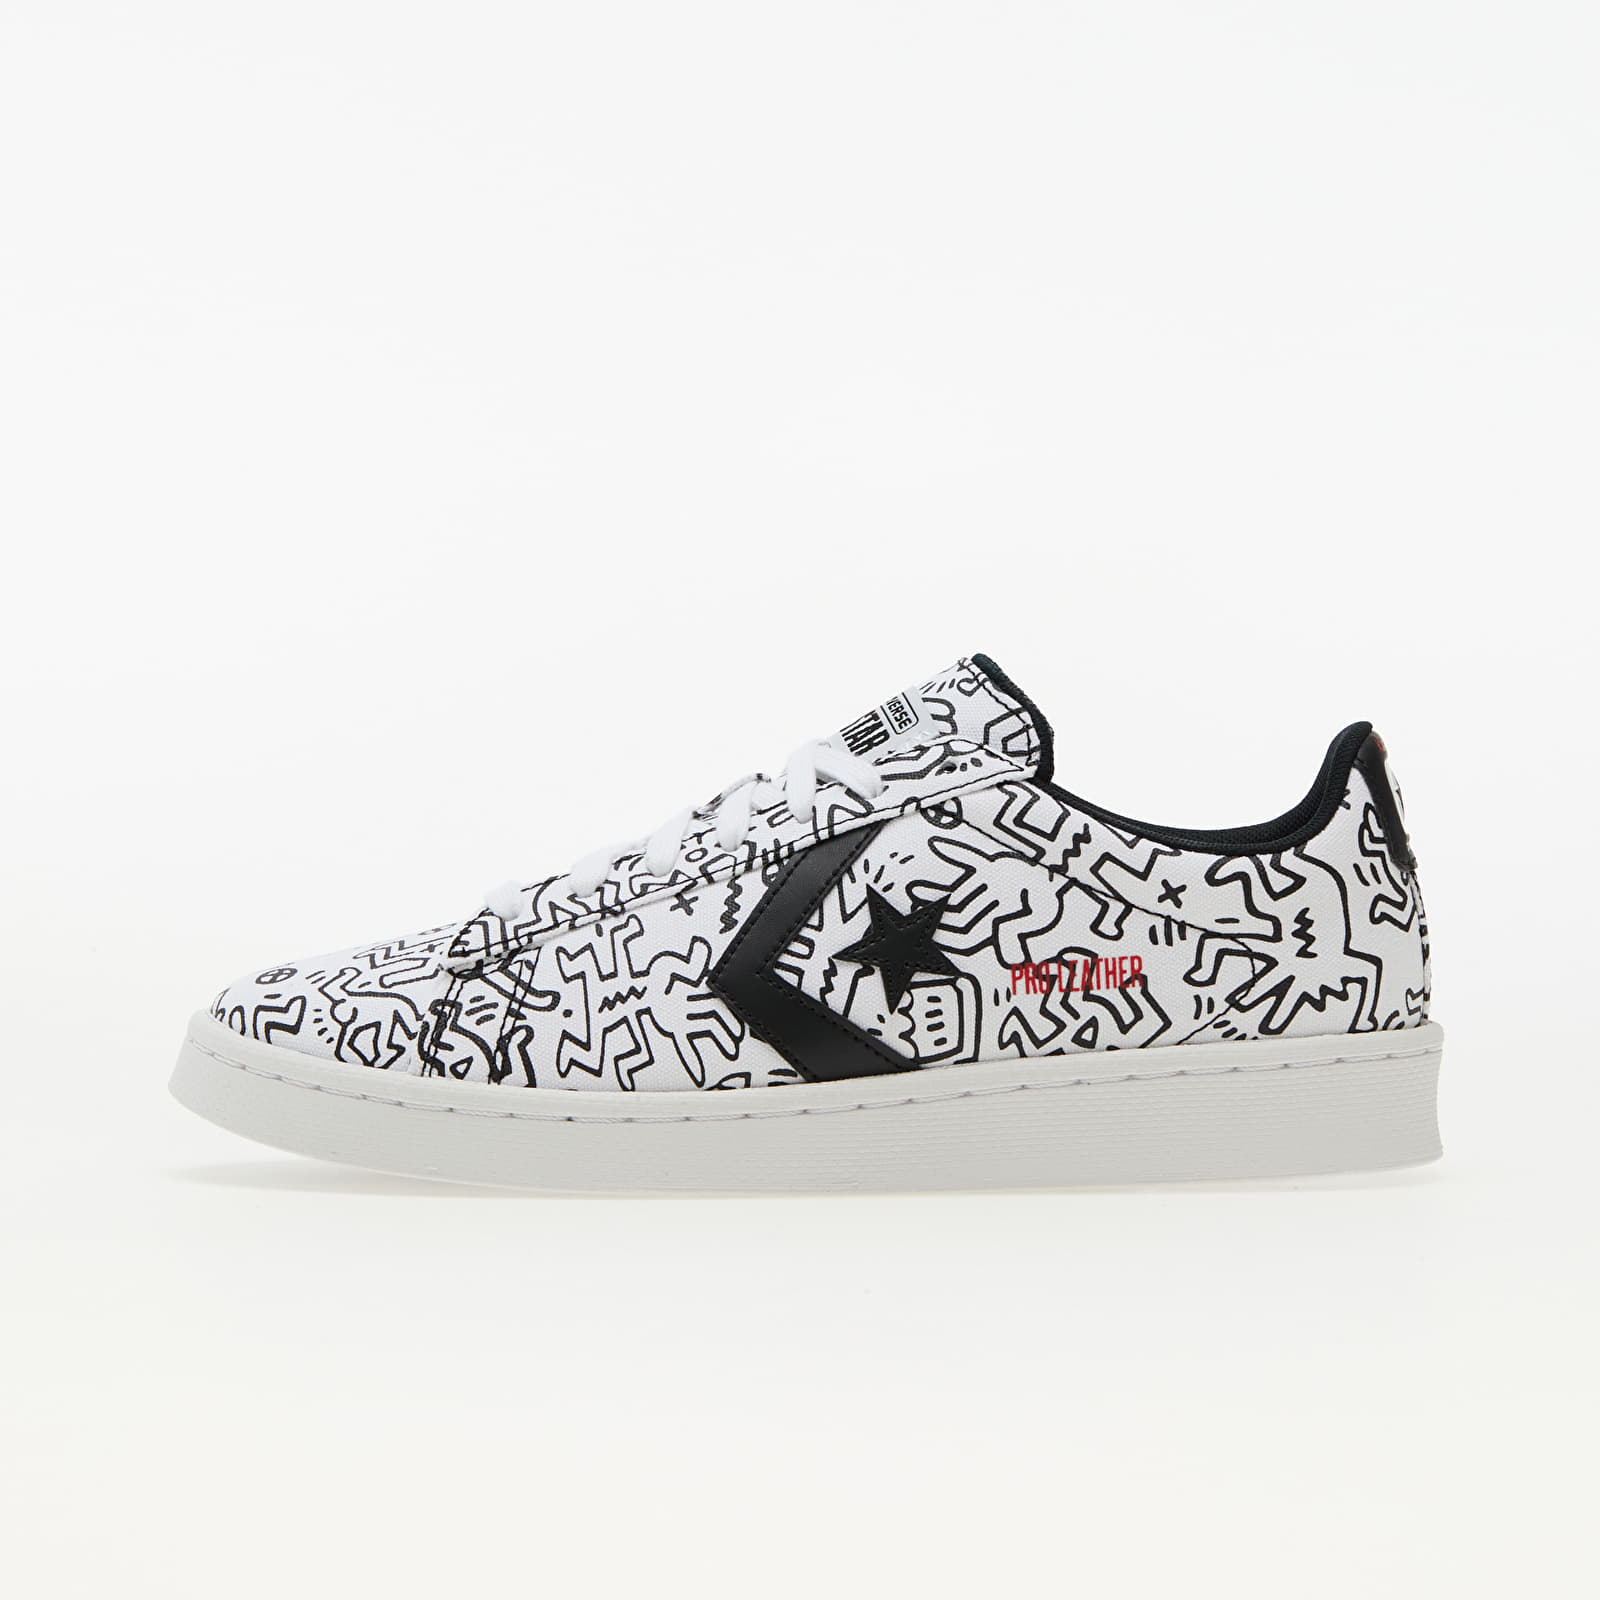 Men's shoes Converse x Keith Haring Pro Leather OX White/ Black/ Red